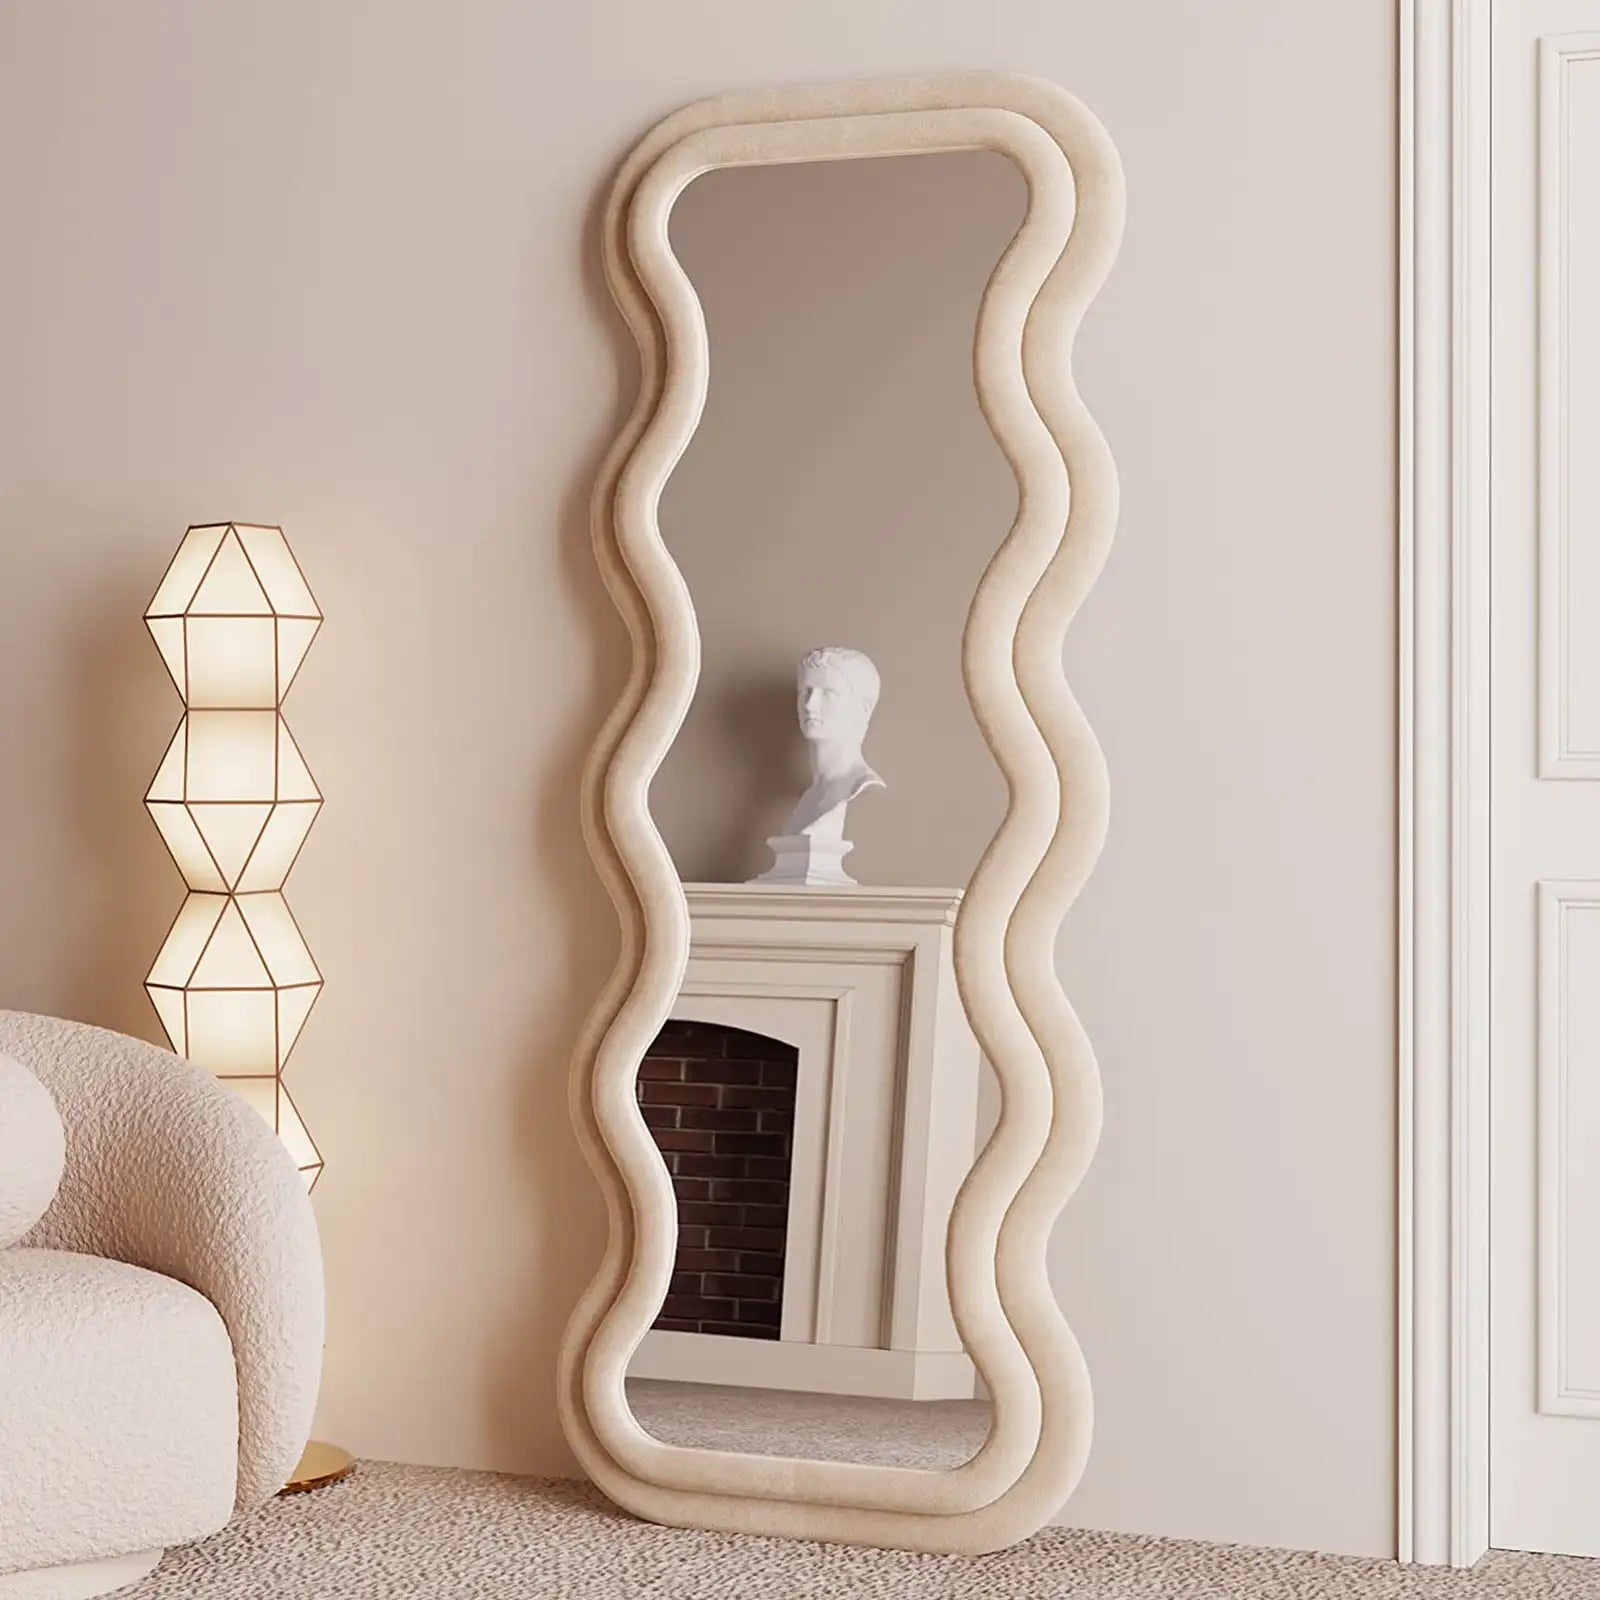 Full Length Mirror 63"x24", Irregular Wavy Mirror, Wave Arched Floor Mirror, Wall Mirror Standing Hanging or Leaning Against Wall for Bedroom, Flannel Wrapped Wooden Frame